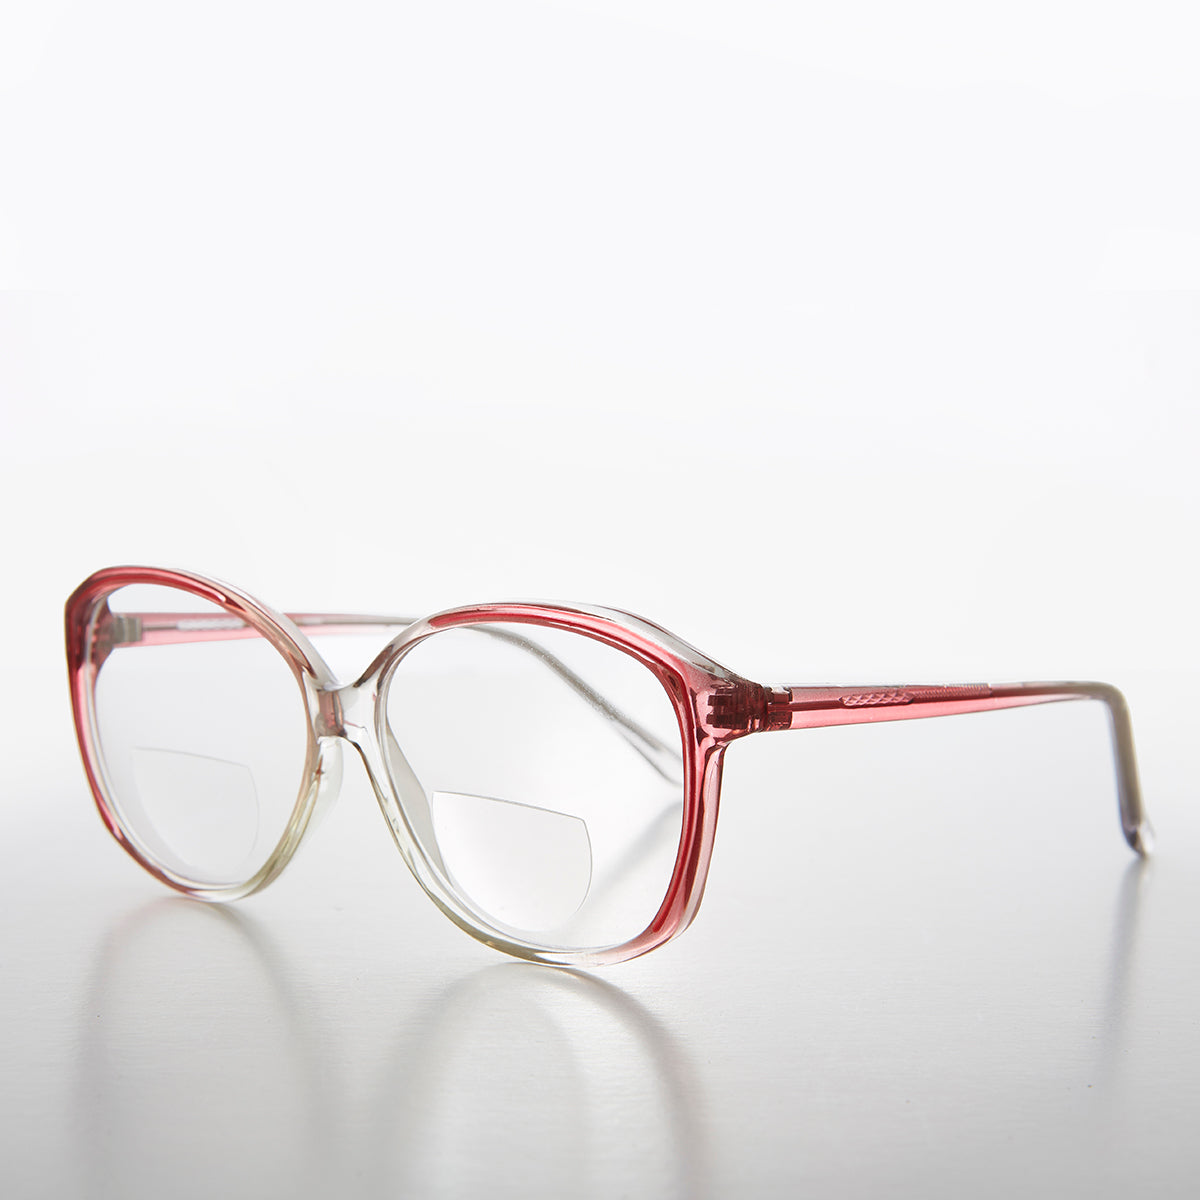 Women's Bifocal Reading Glasses with Color Accent 